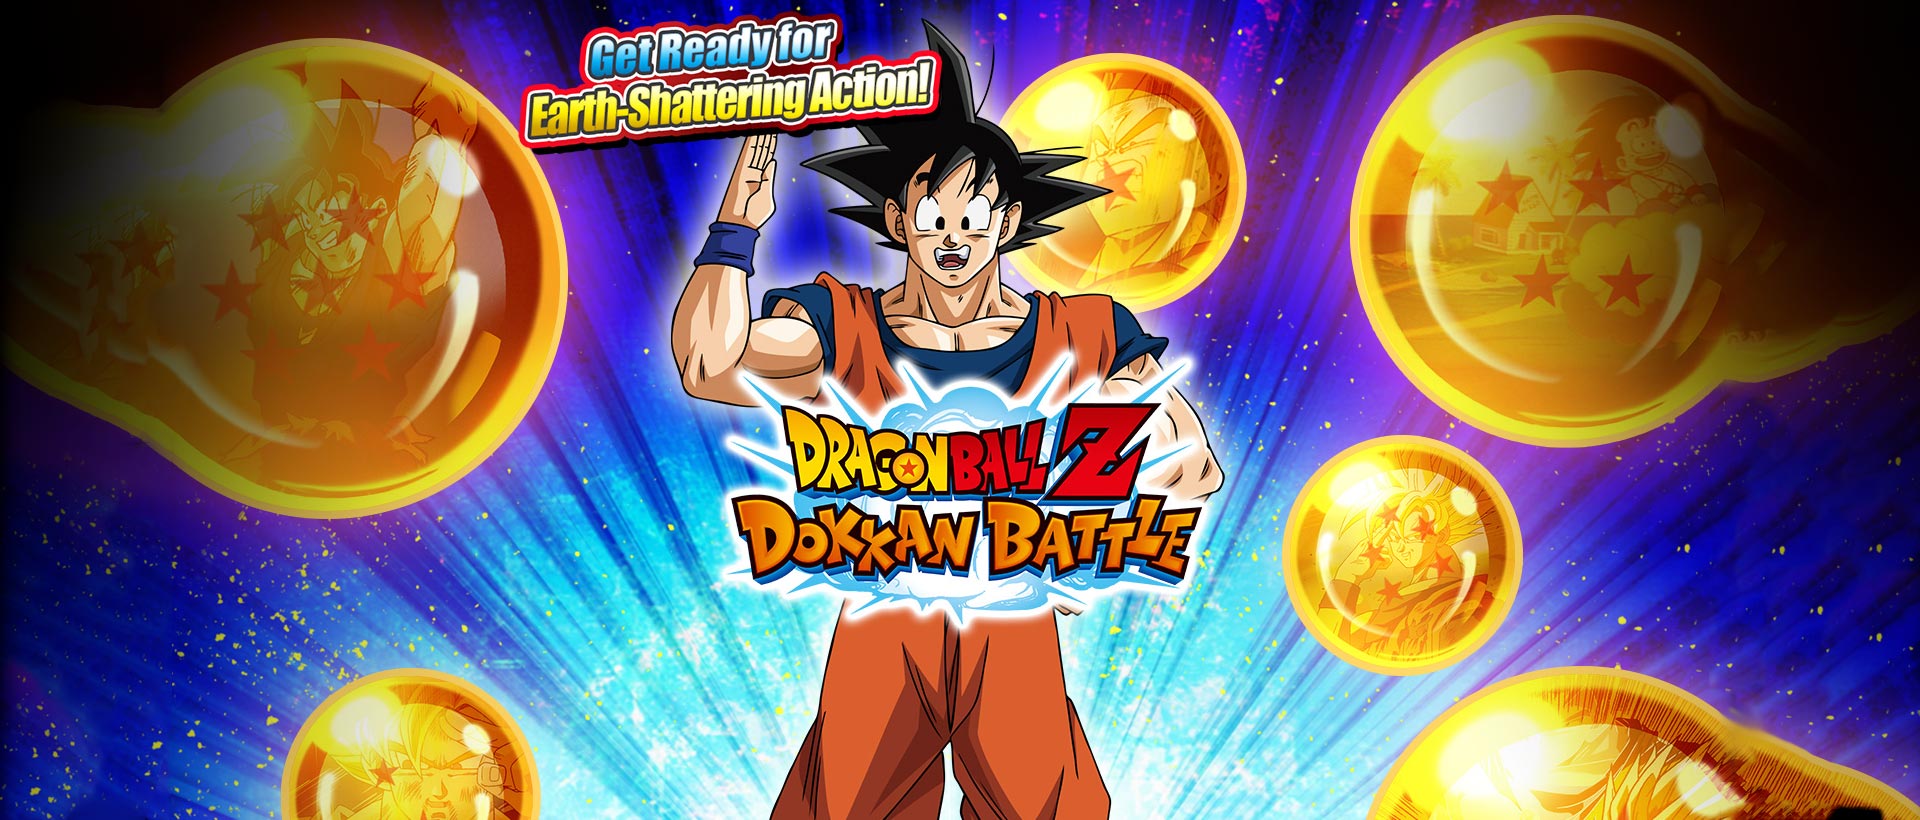 Download & Play DRAGON BALL Z DOKKAN BATTLE on PC & Mac with NoxPlayer (Emulator)